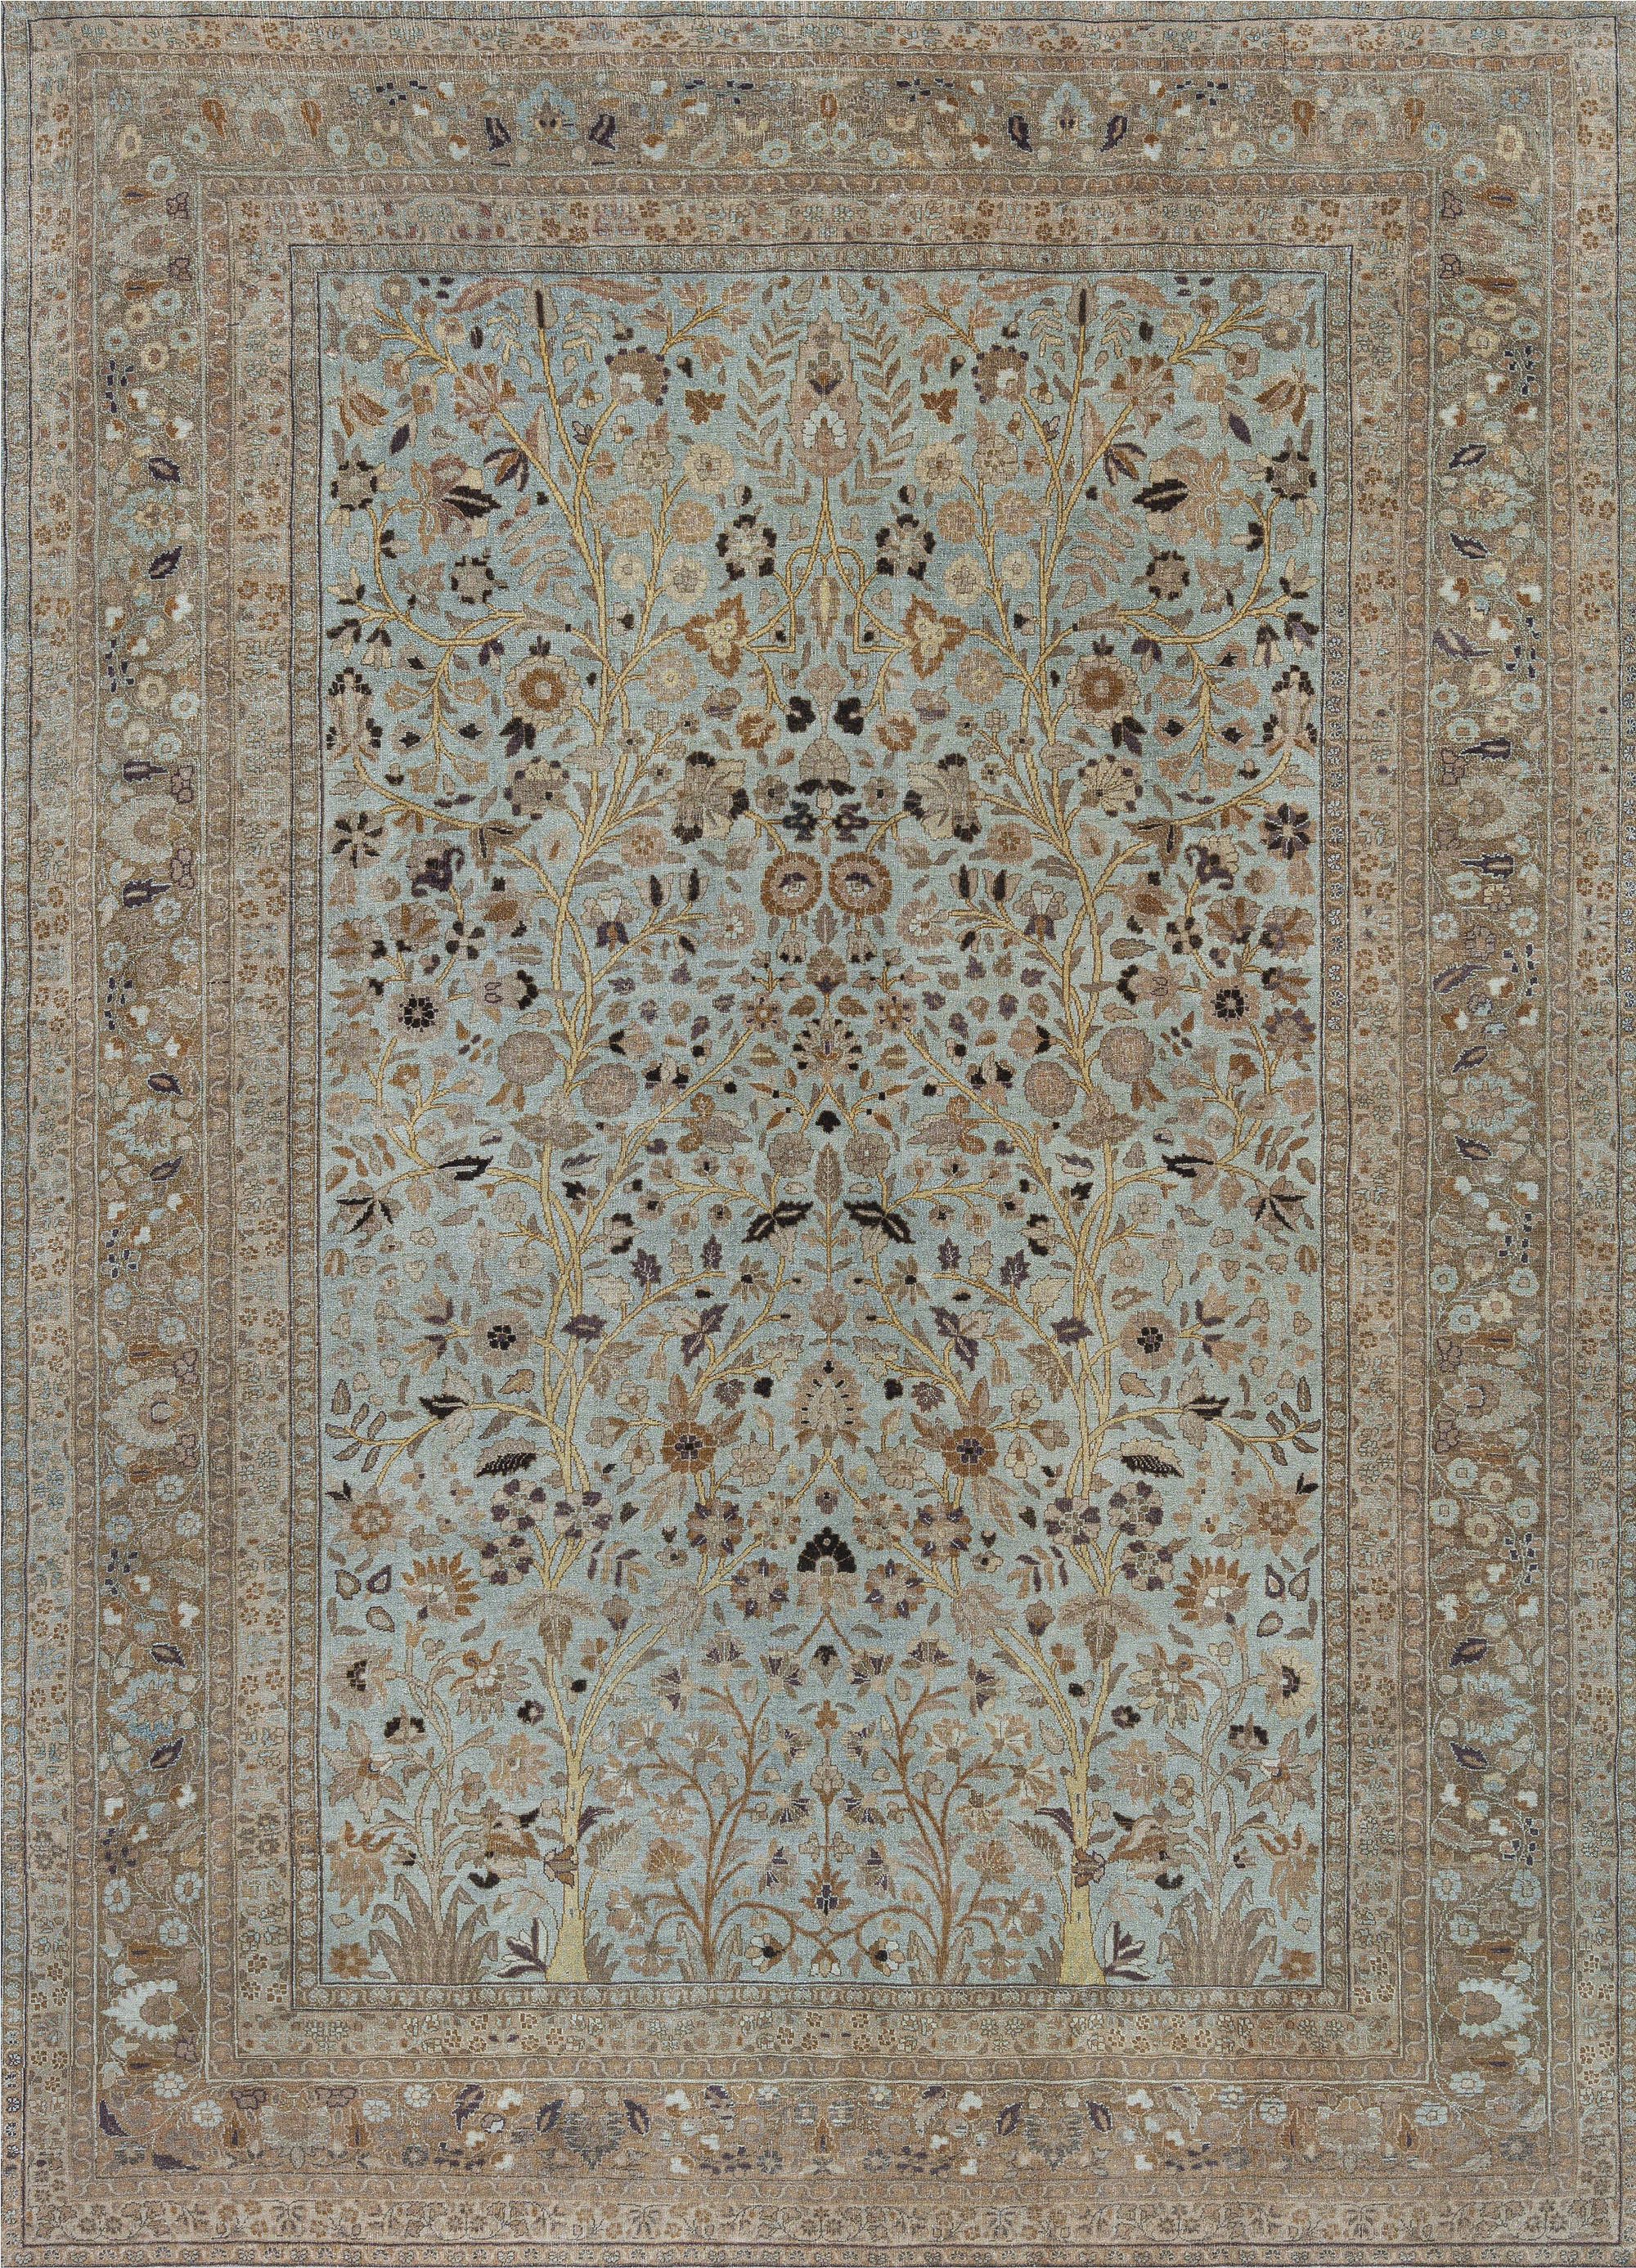 Antique Persian Tabriz Rug in Blue, Brown, Gold BB7342